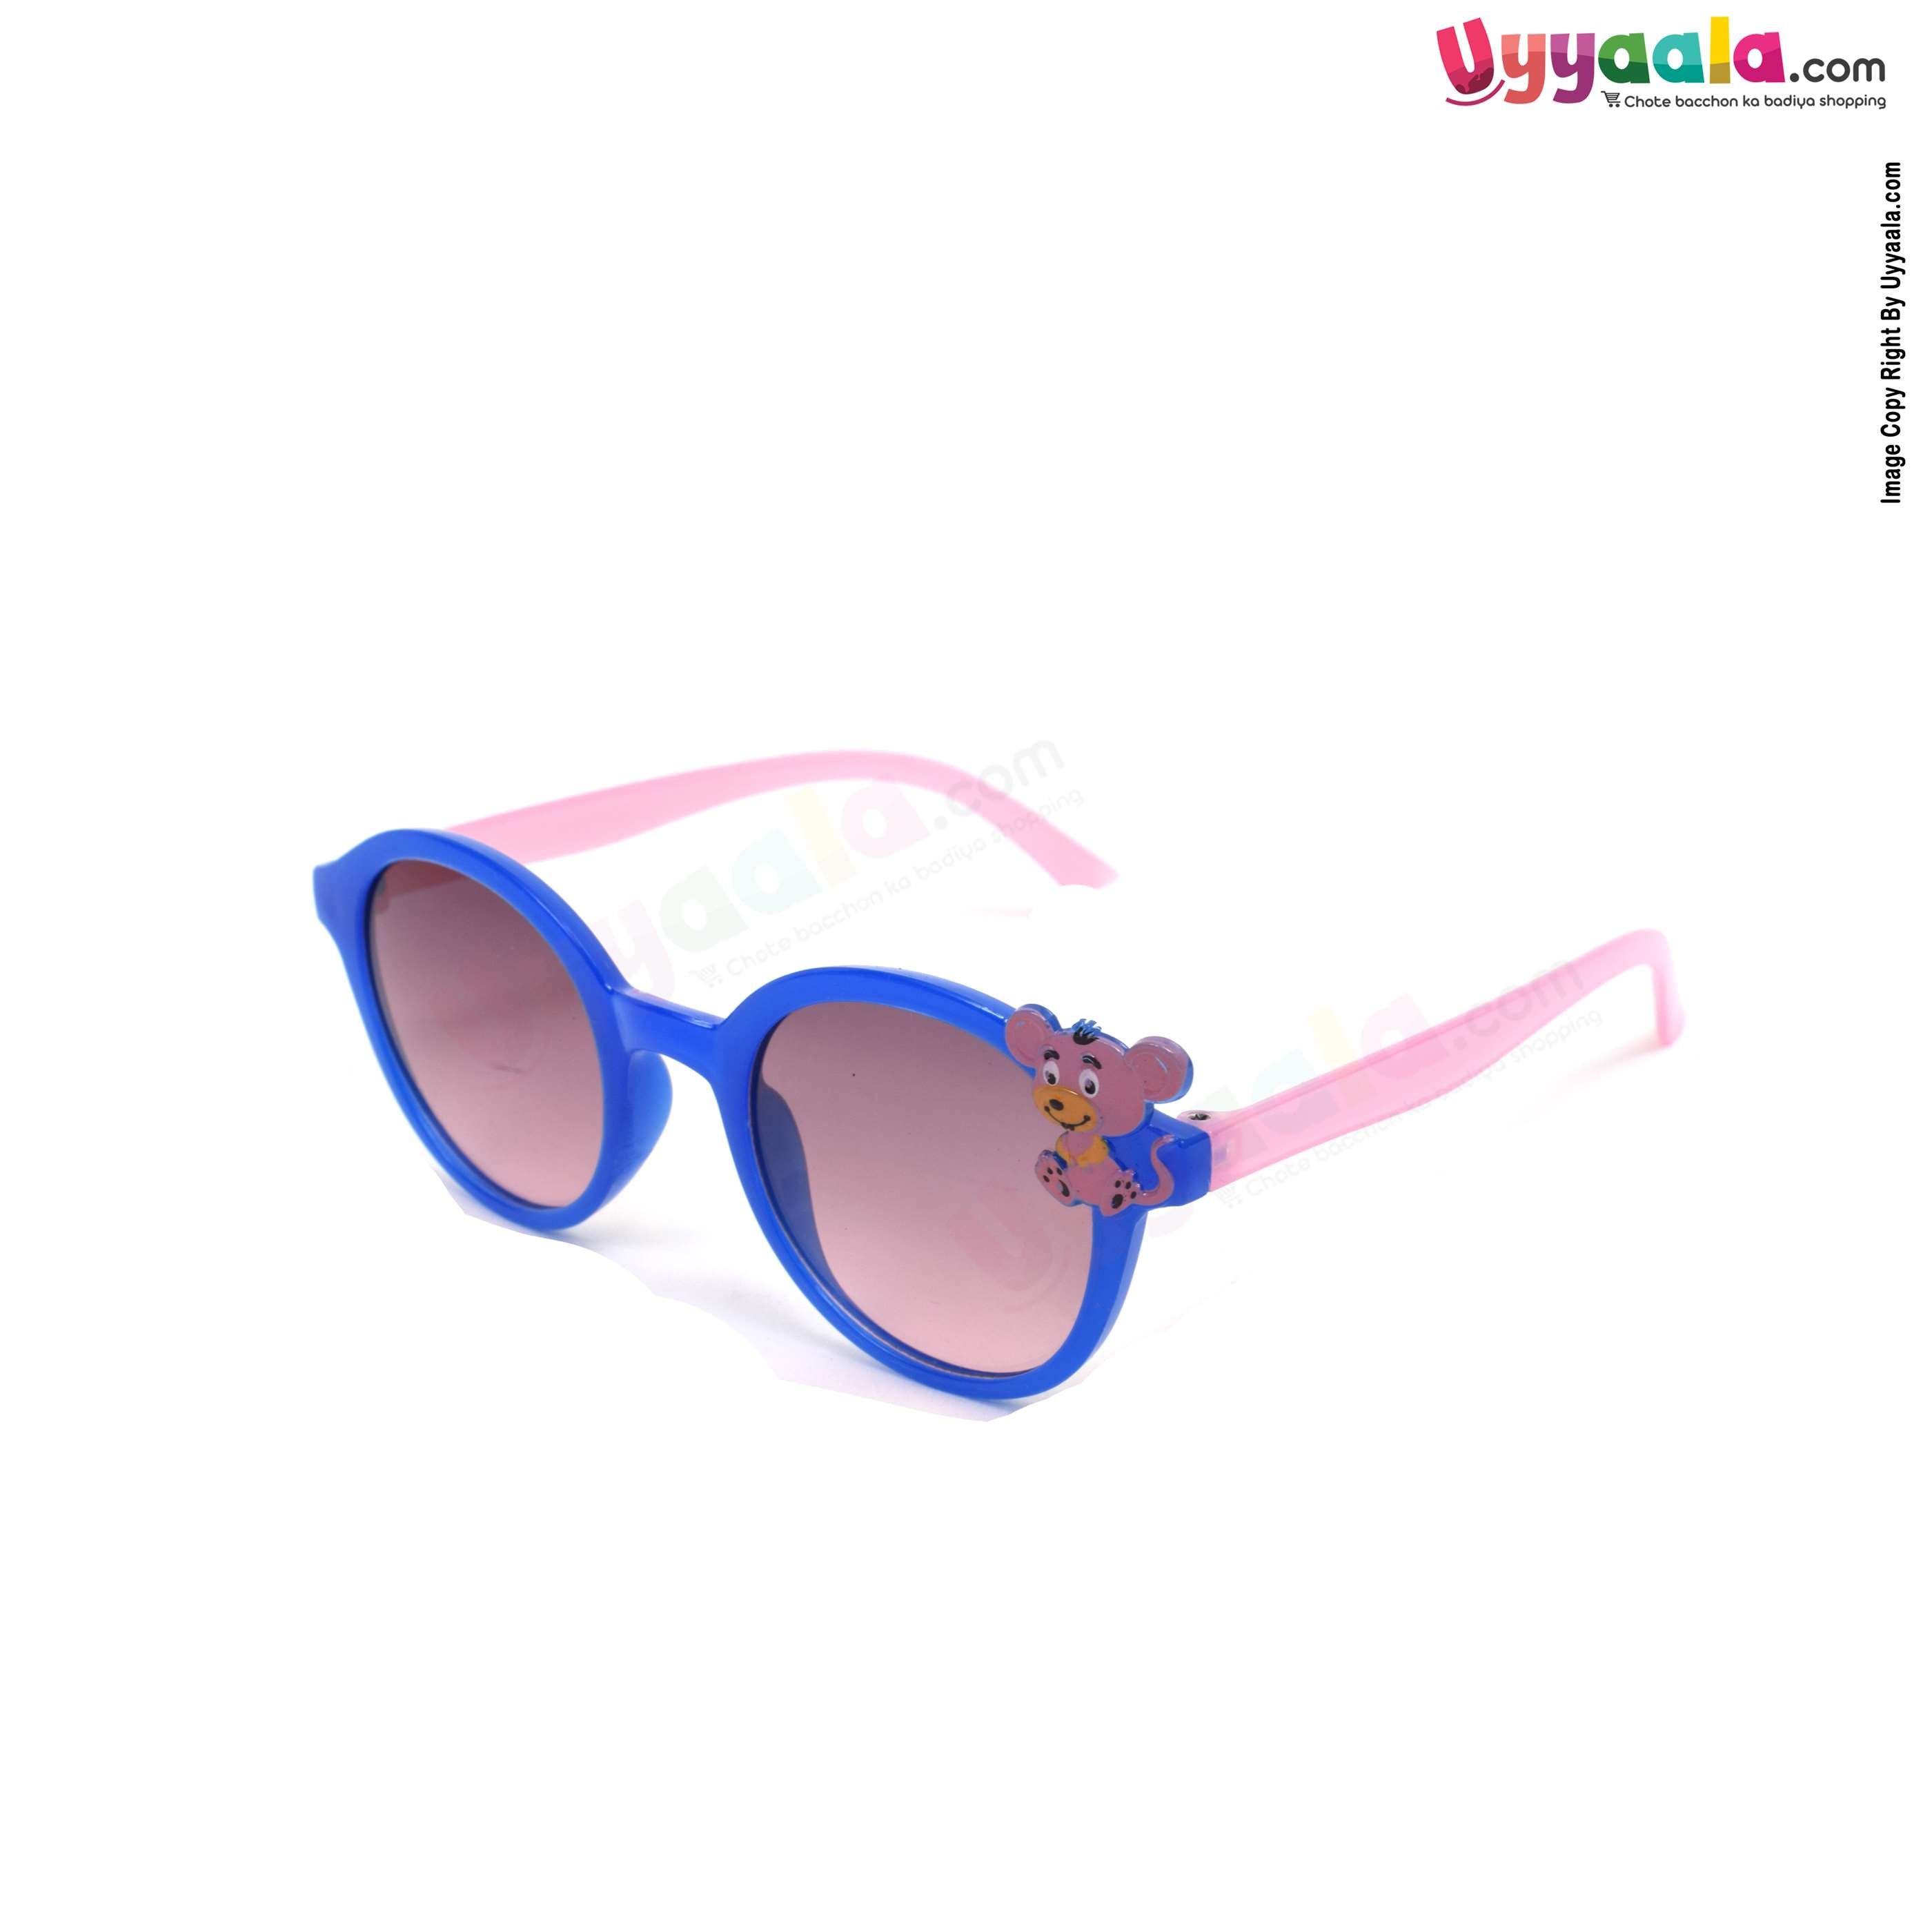 Stylish cat-eye transparent sunglasses for kids - blue & pink, 1 - 10 years